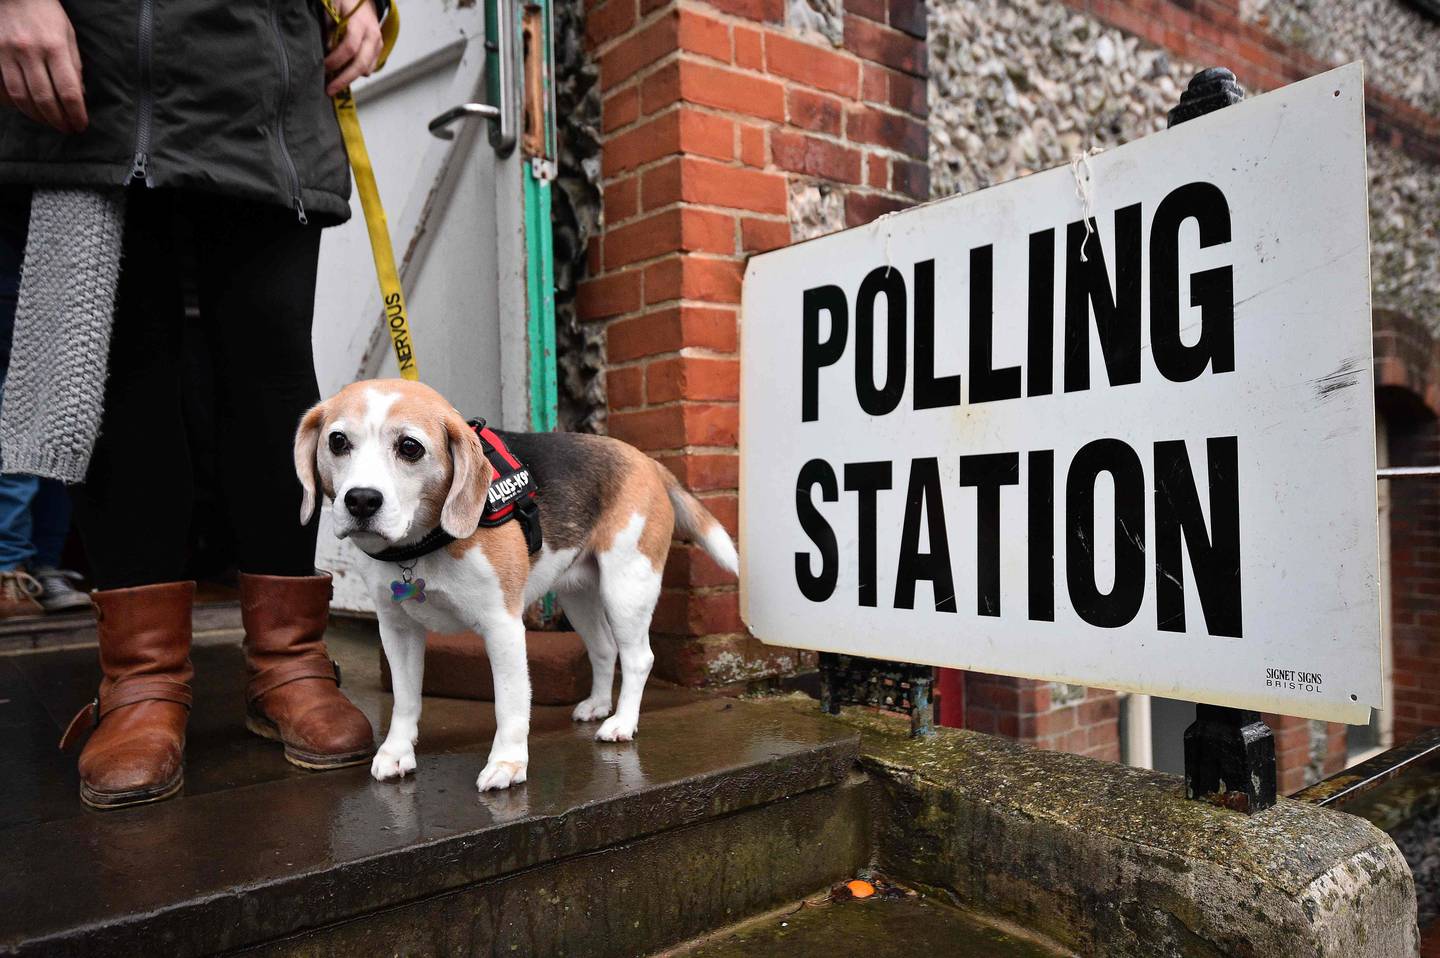 A voter leaves with their dog Lilly, after casting their vote at a polling station in Church in Brighton as Britain holds a general election on December 12, 2019. (Photo by Glyn KIRK / AFP)